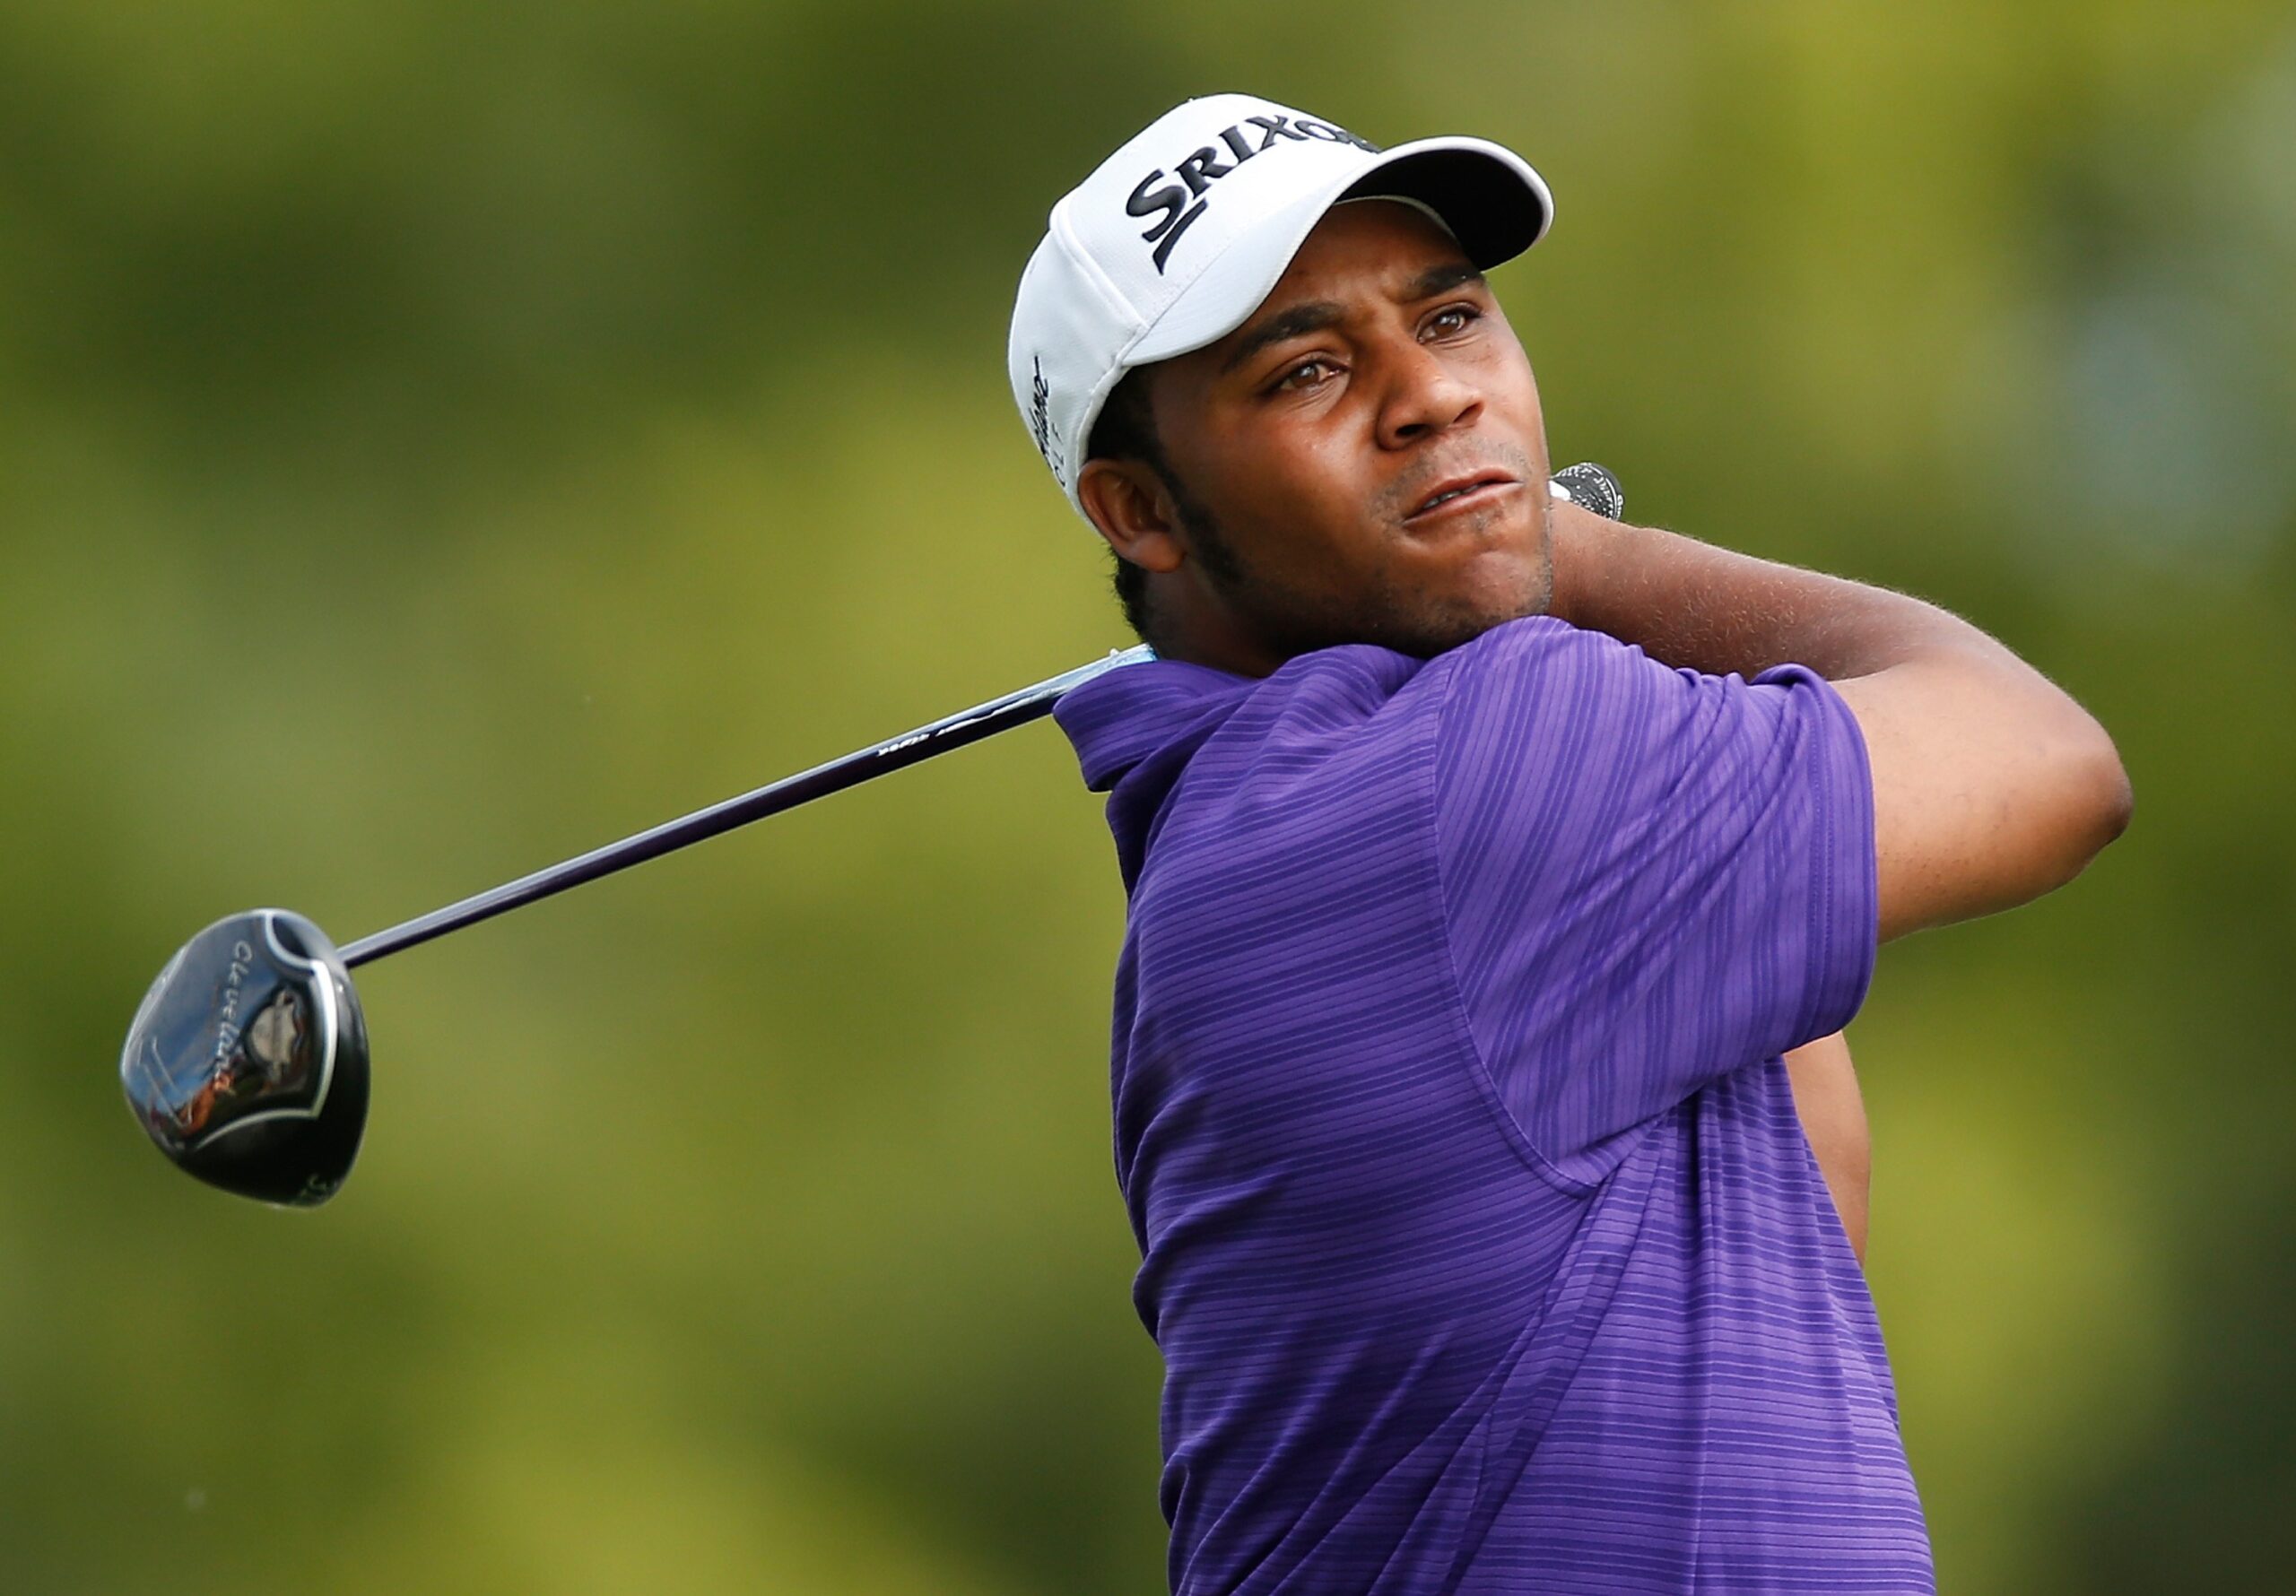 MEET THE NEXT GENERATION OF BLACK PRO GOLFERS The African American